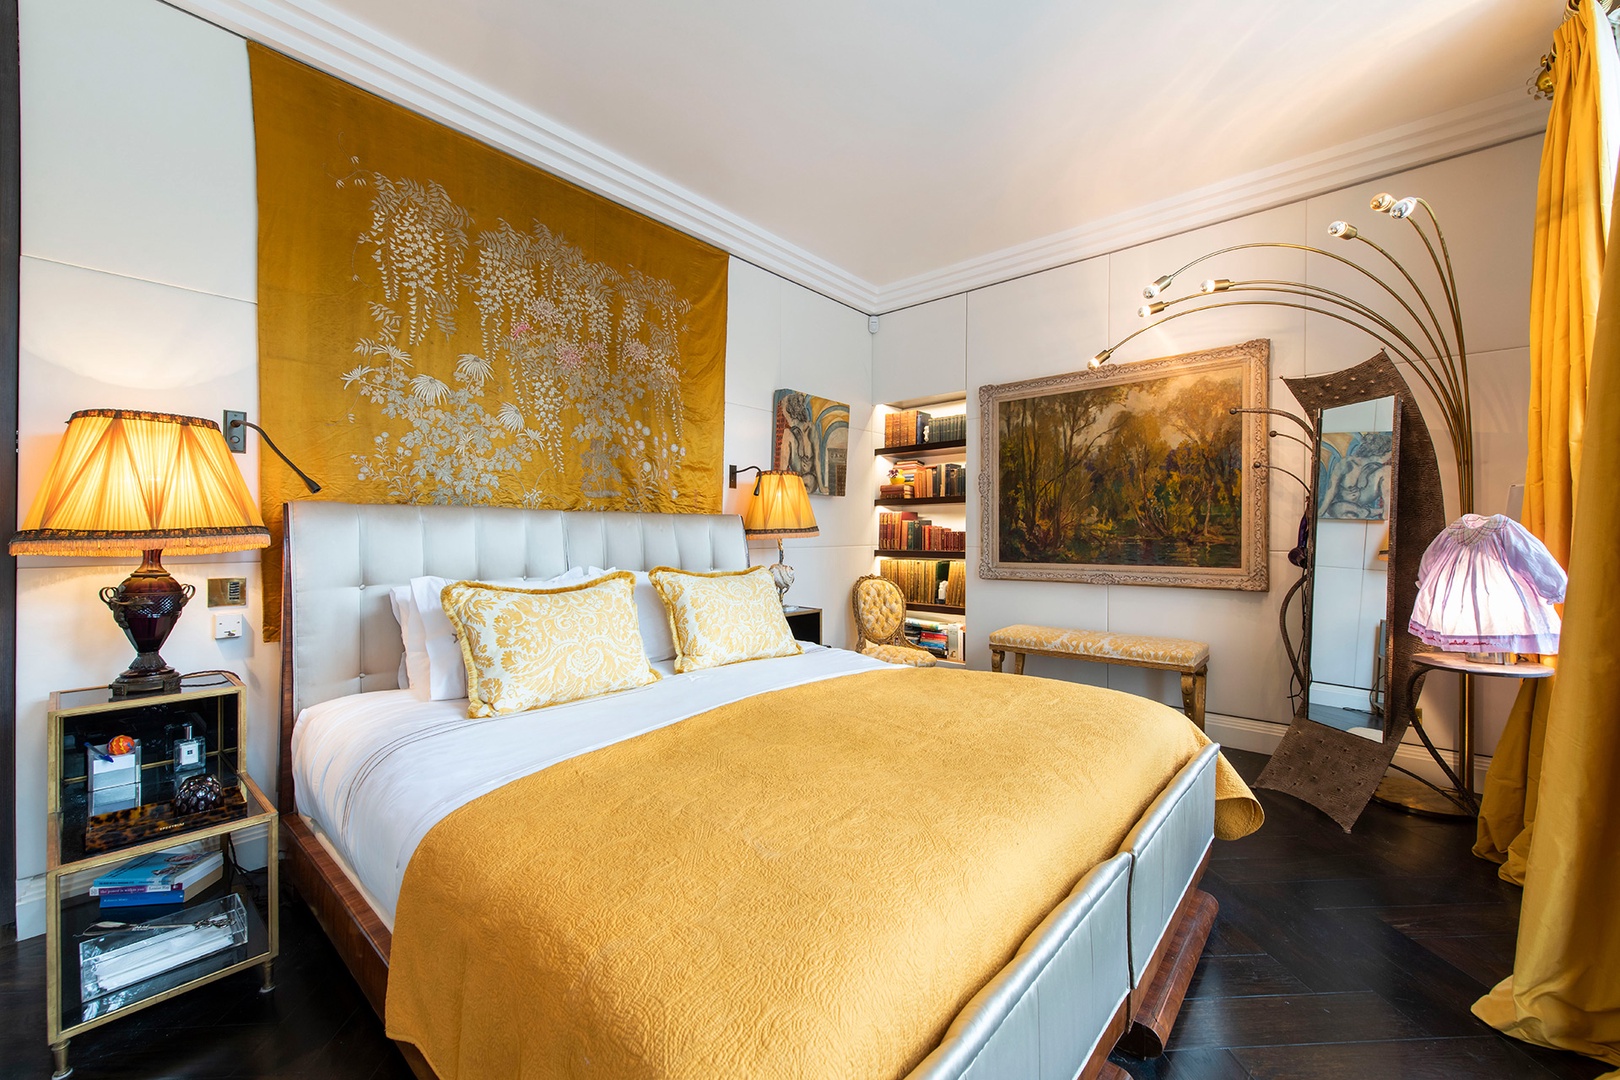 Inviting bedroom with fine art and cheerful warm yellow accents.